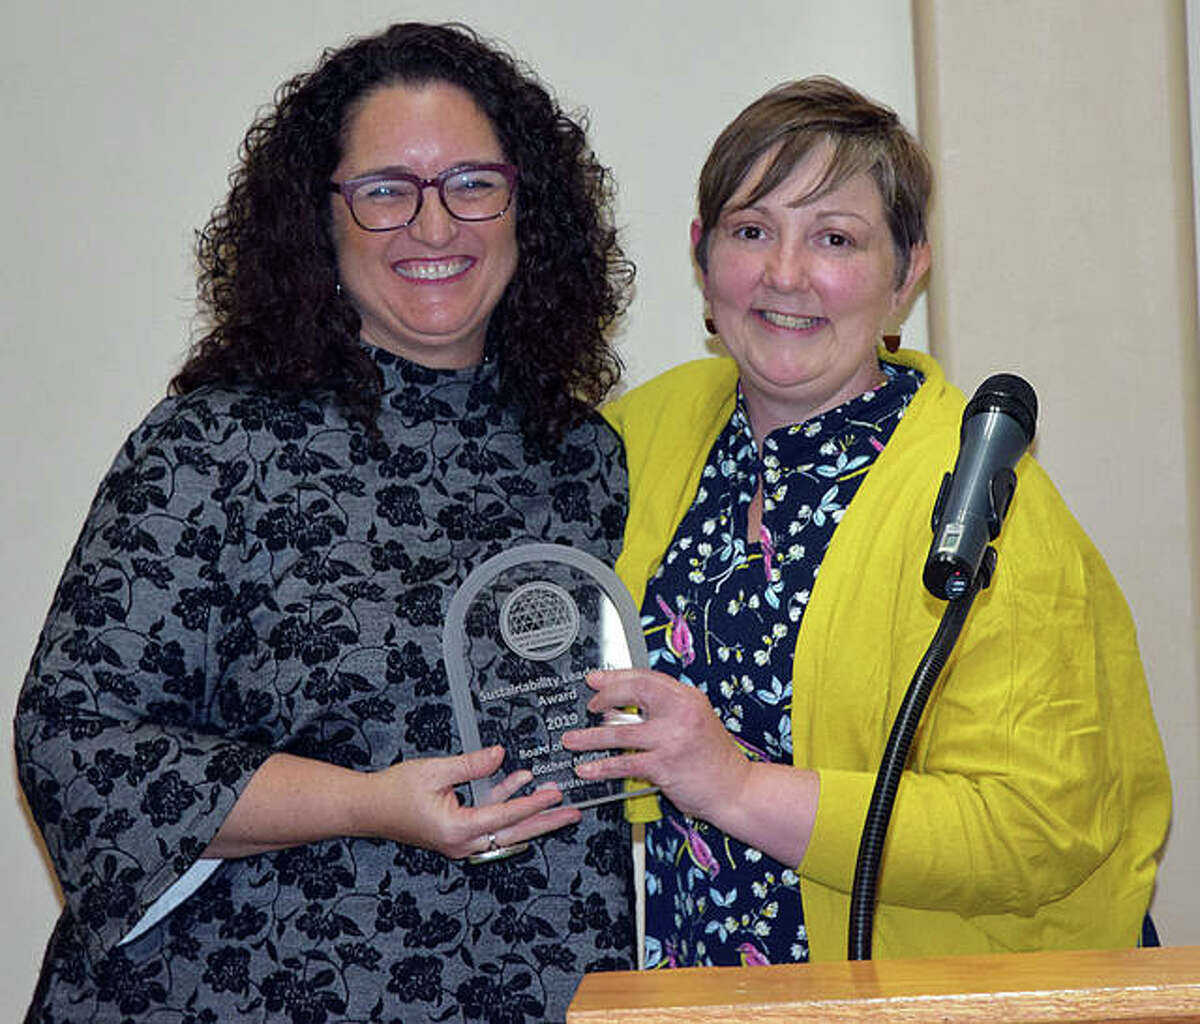 The Sustainability Leadership Award was presented to the Land of Goshen Community Market. Accepting the award on behalf of the Market is Sharon Henderson, left, Land of Goshen Community Market president. Jessica DeSpain, Goshen Market Foundation president, presented the award.